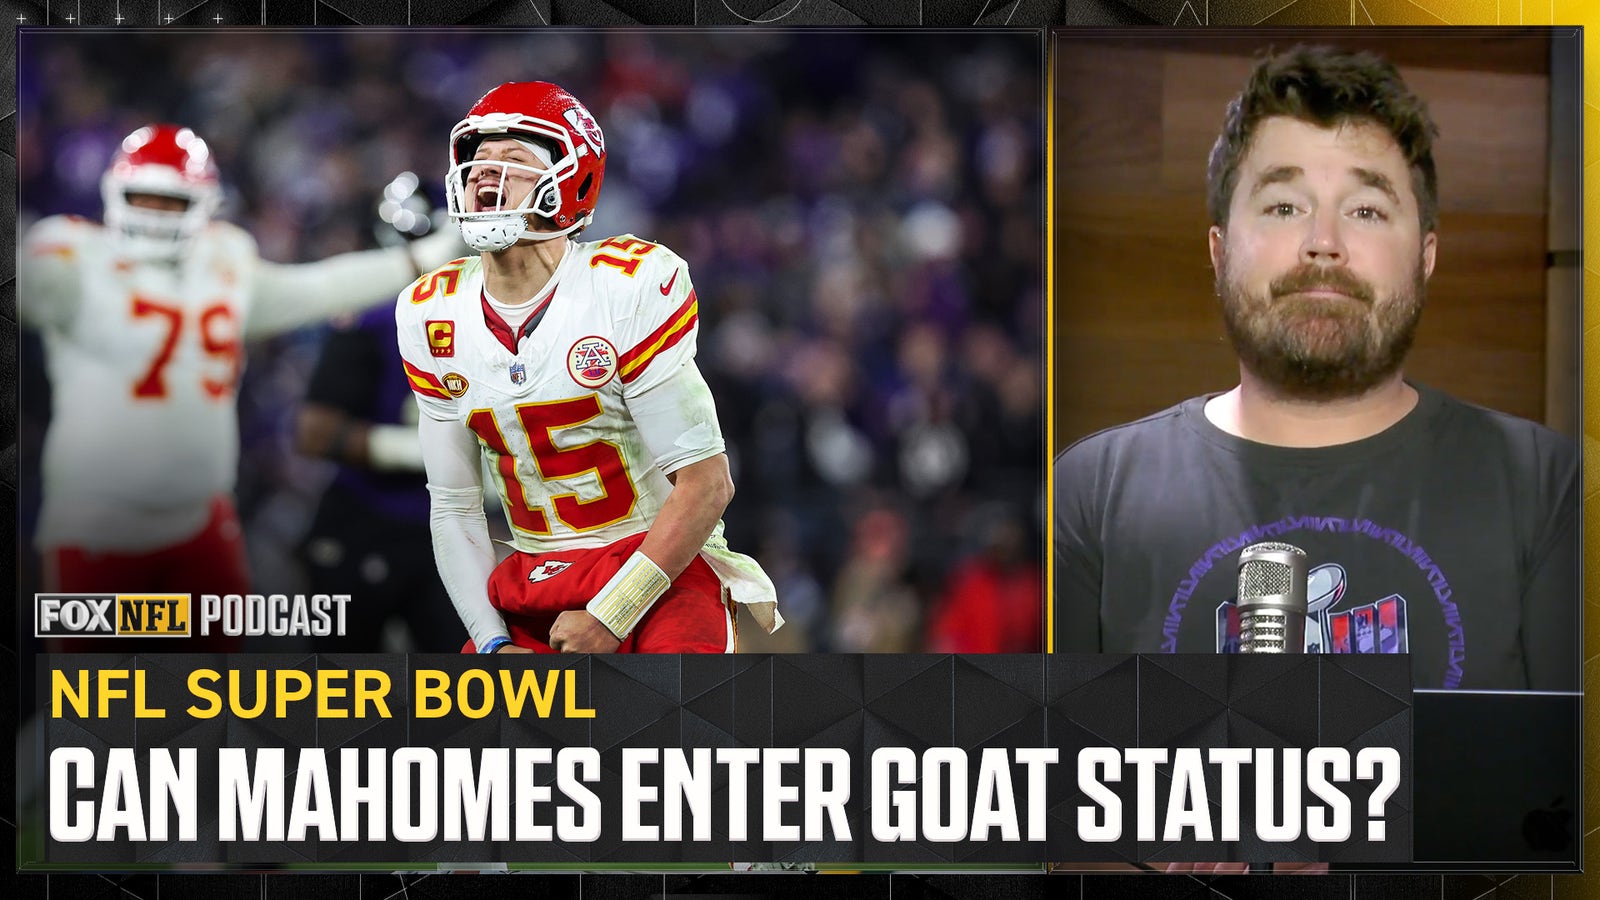 Does Patrick Mahomes enter GOAT status with Super Bowl win?